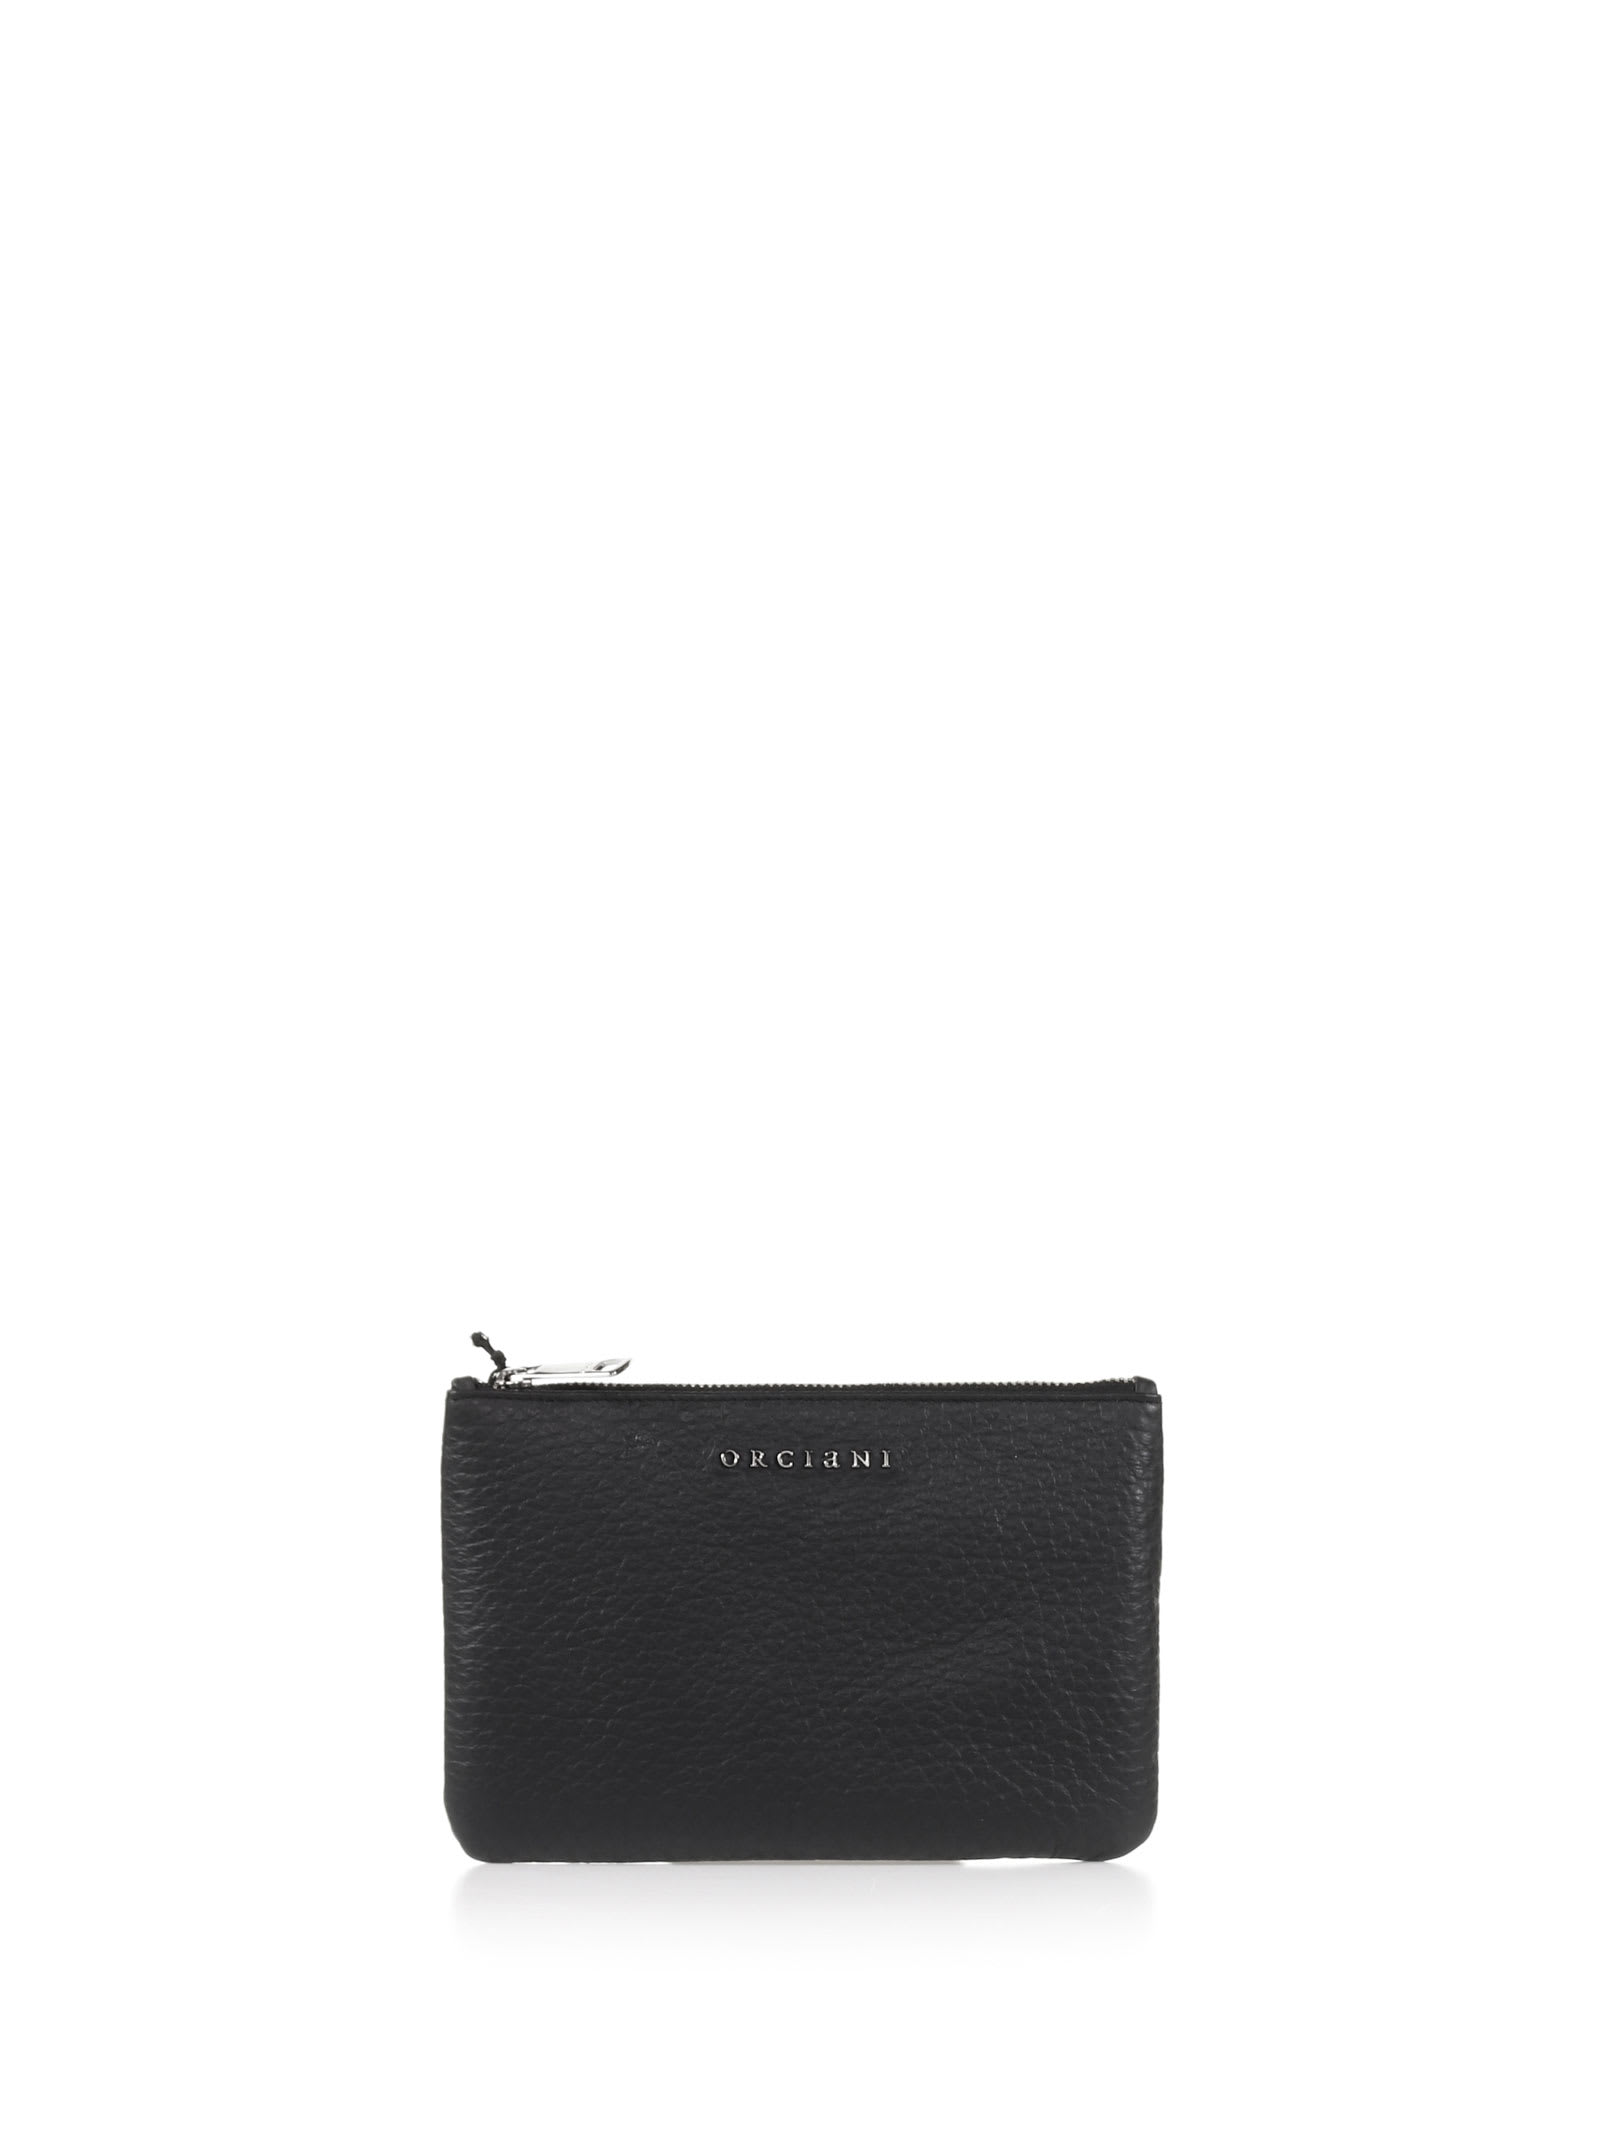 Orciani Orciani Black Letaher Pouch